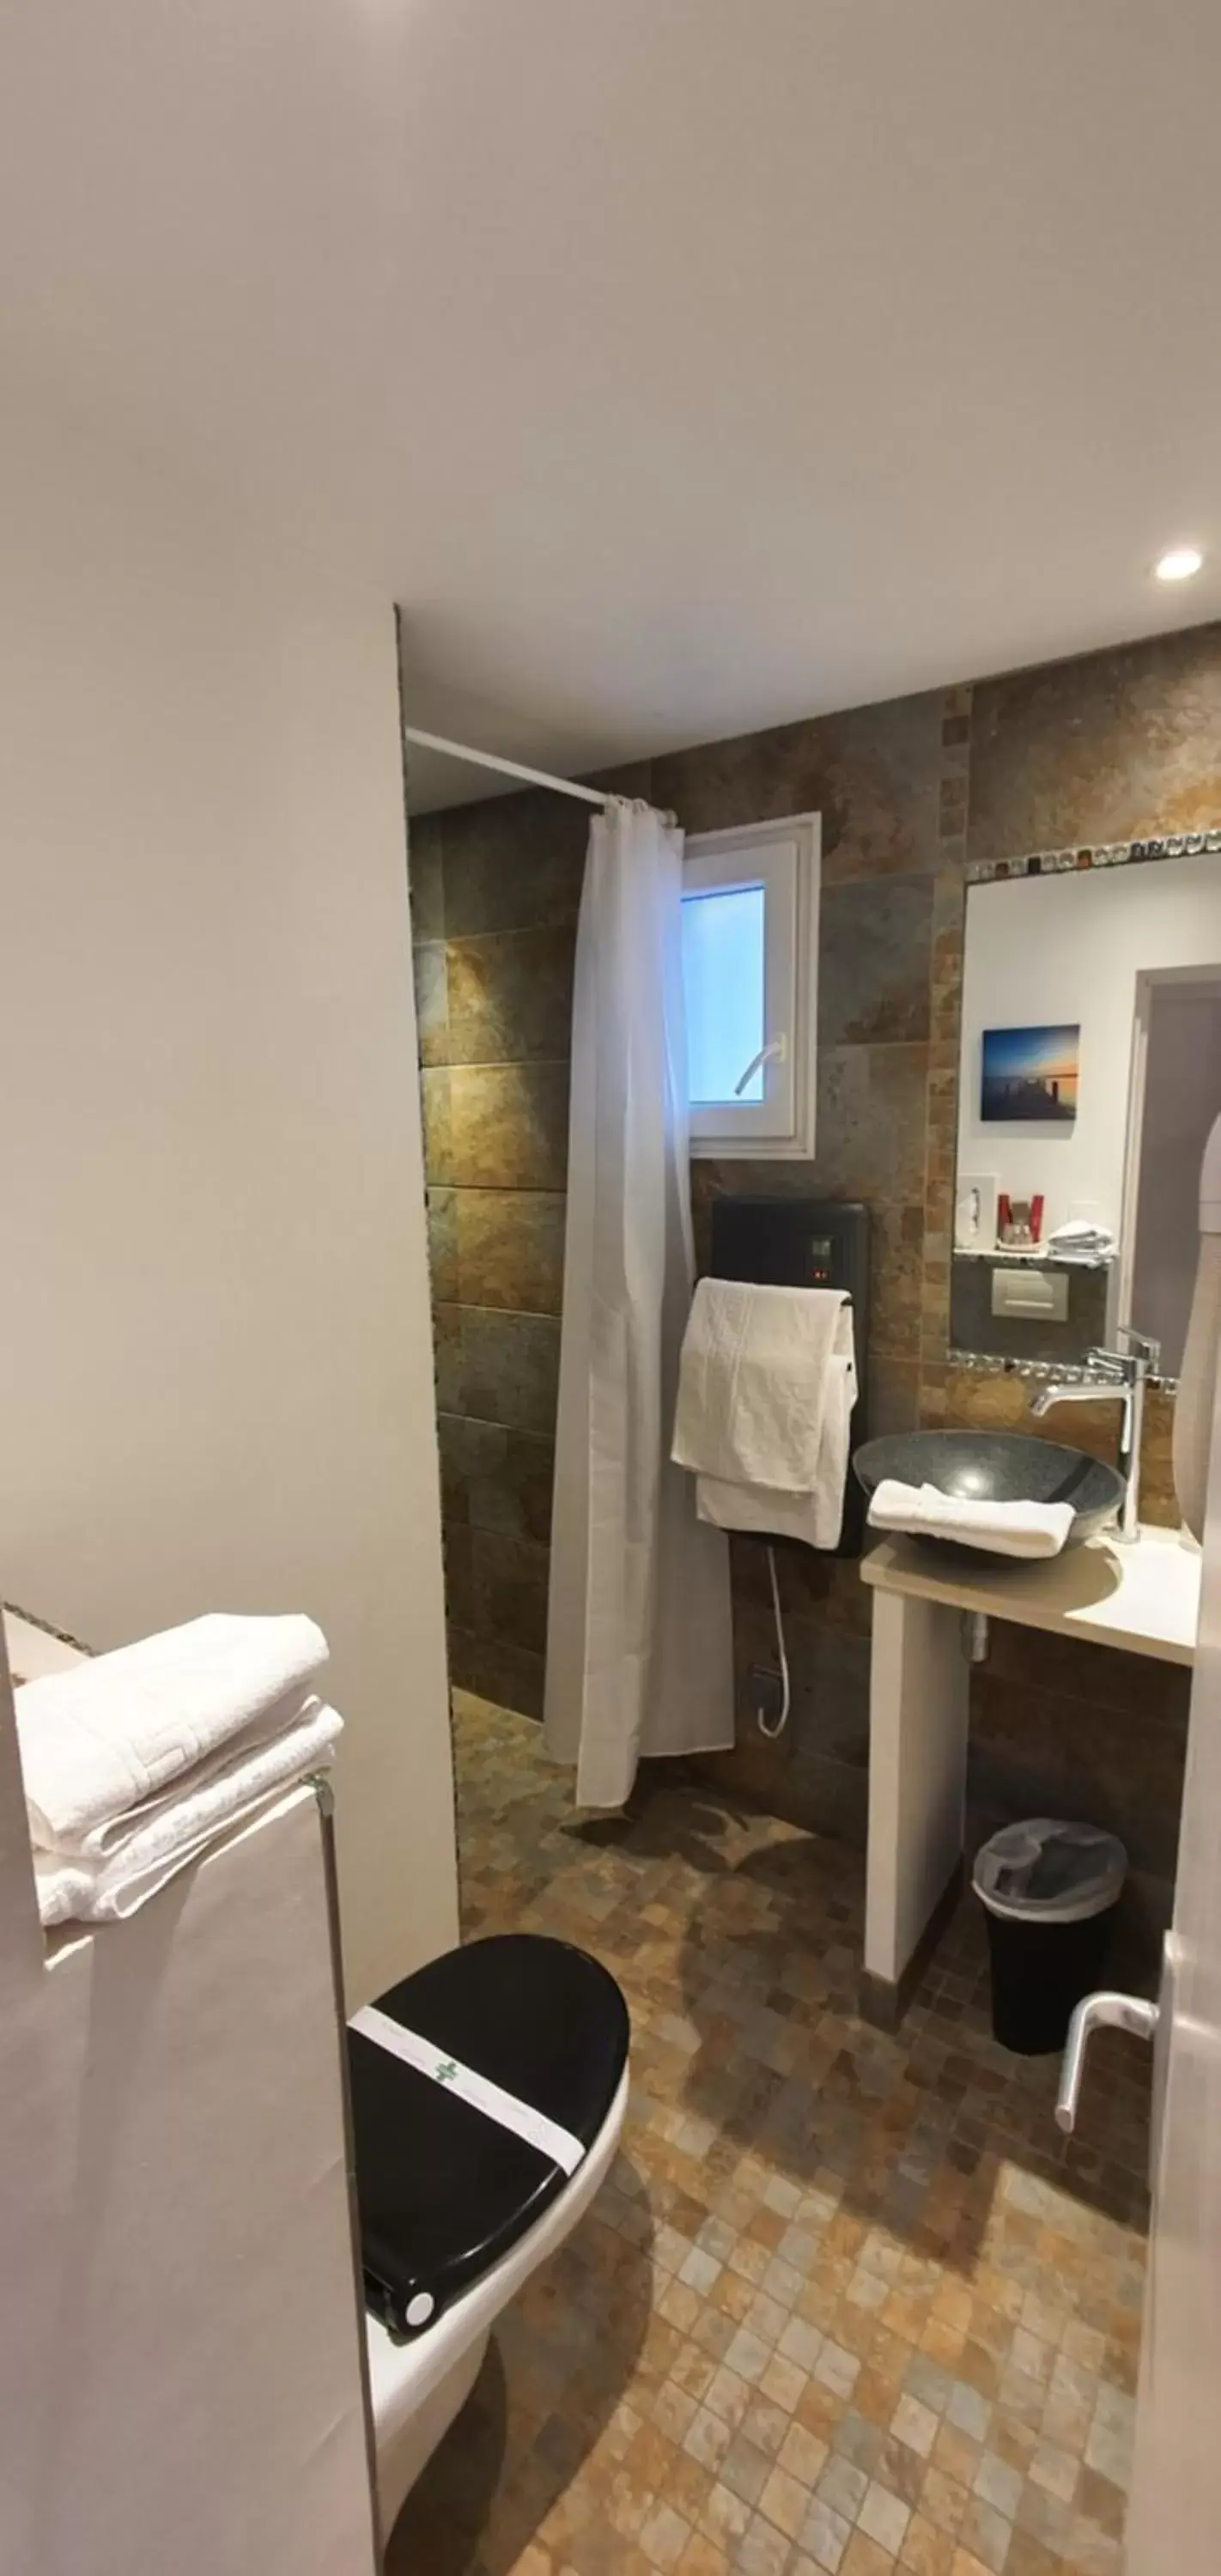 Bathroom in Hotel Cote d'Argent